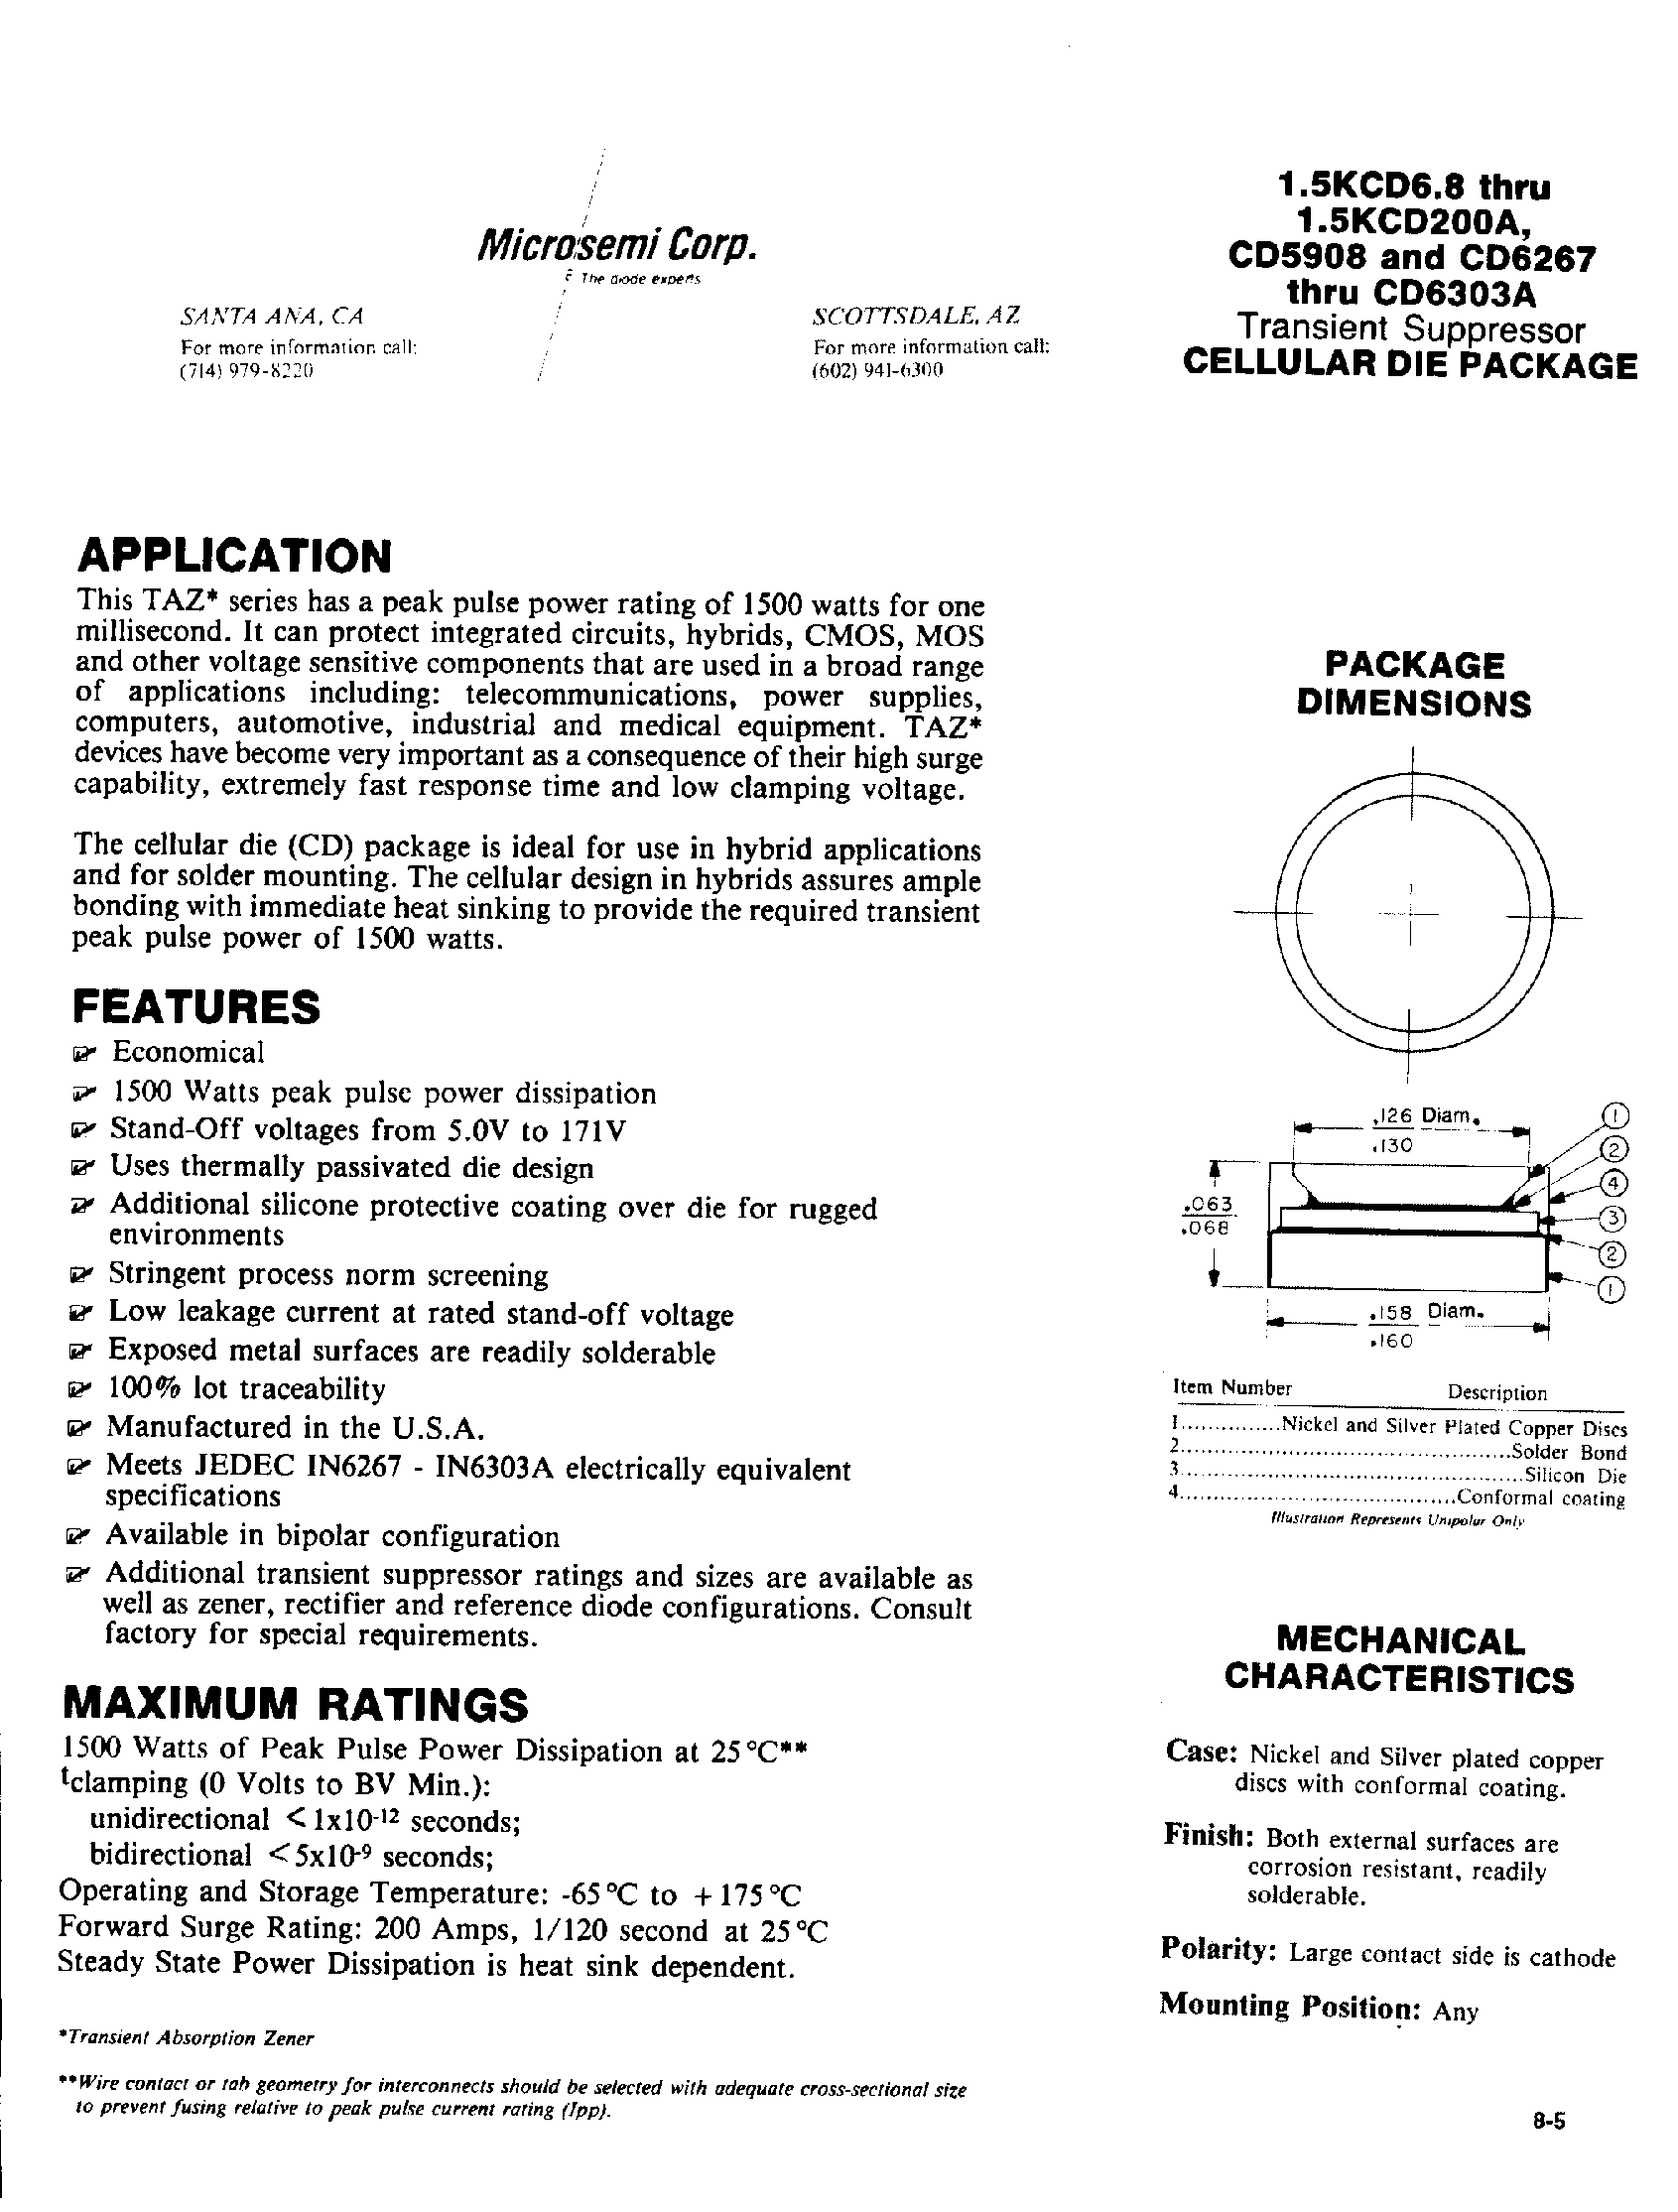 Datasheet CD6288A - Transient suppressor CELLULAR DIE PACKAGE page 1